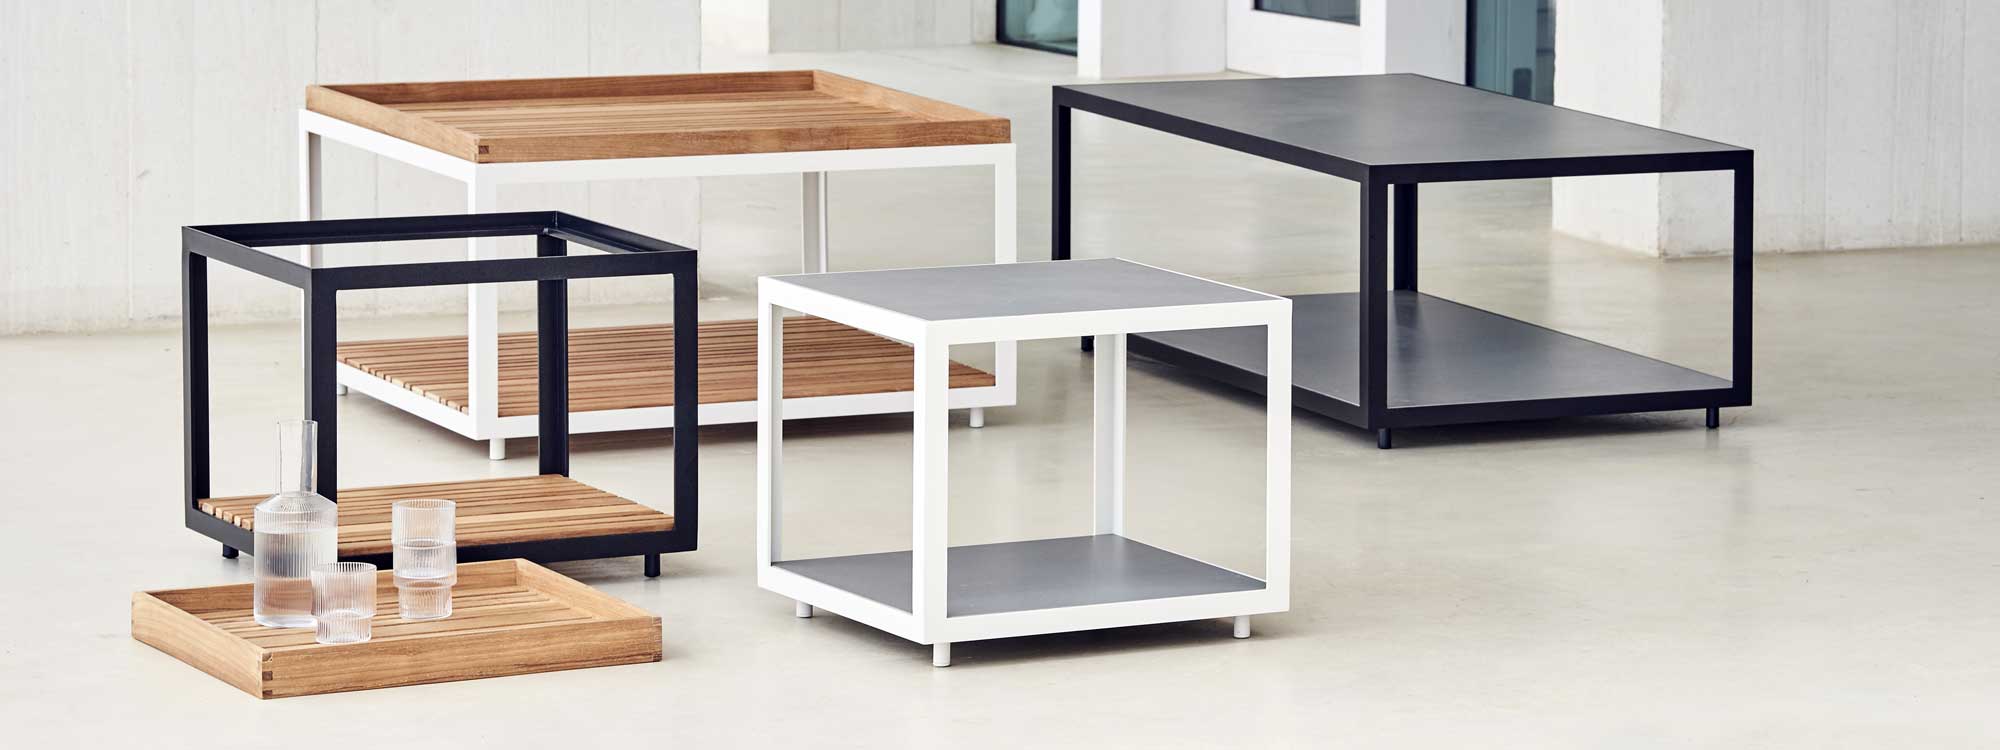 Image showing different sizes and finishes of Cane-line Level low tables and coffee tables